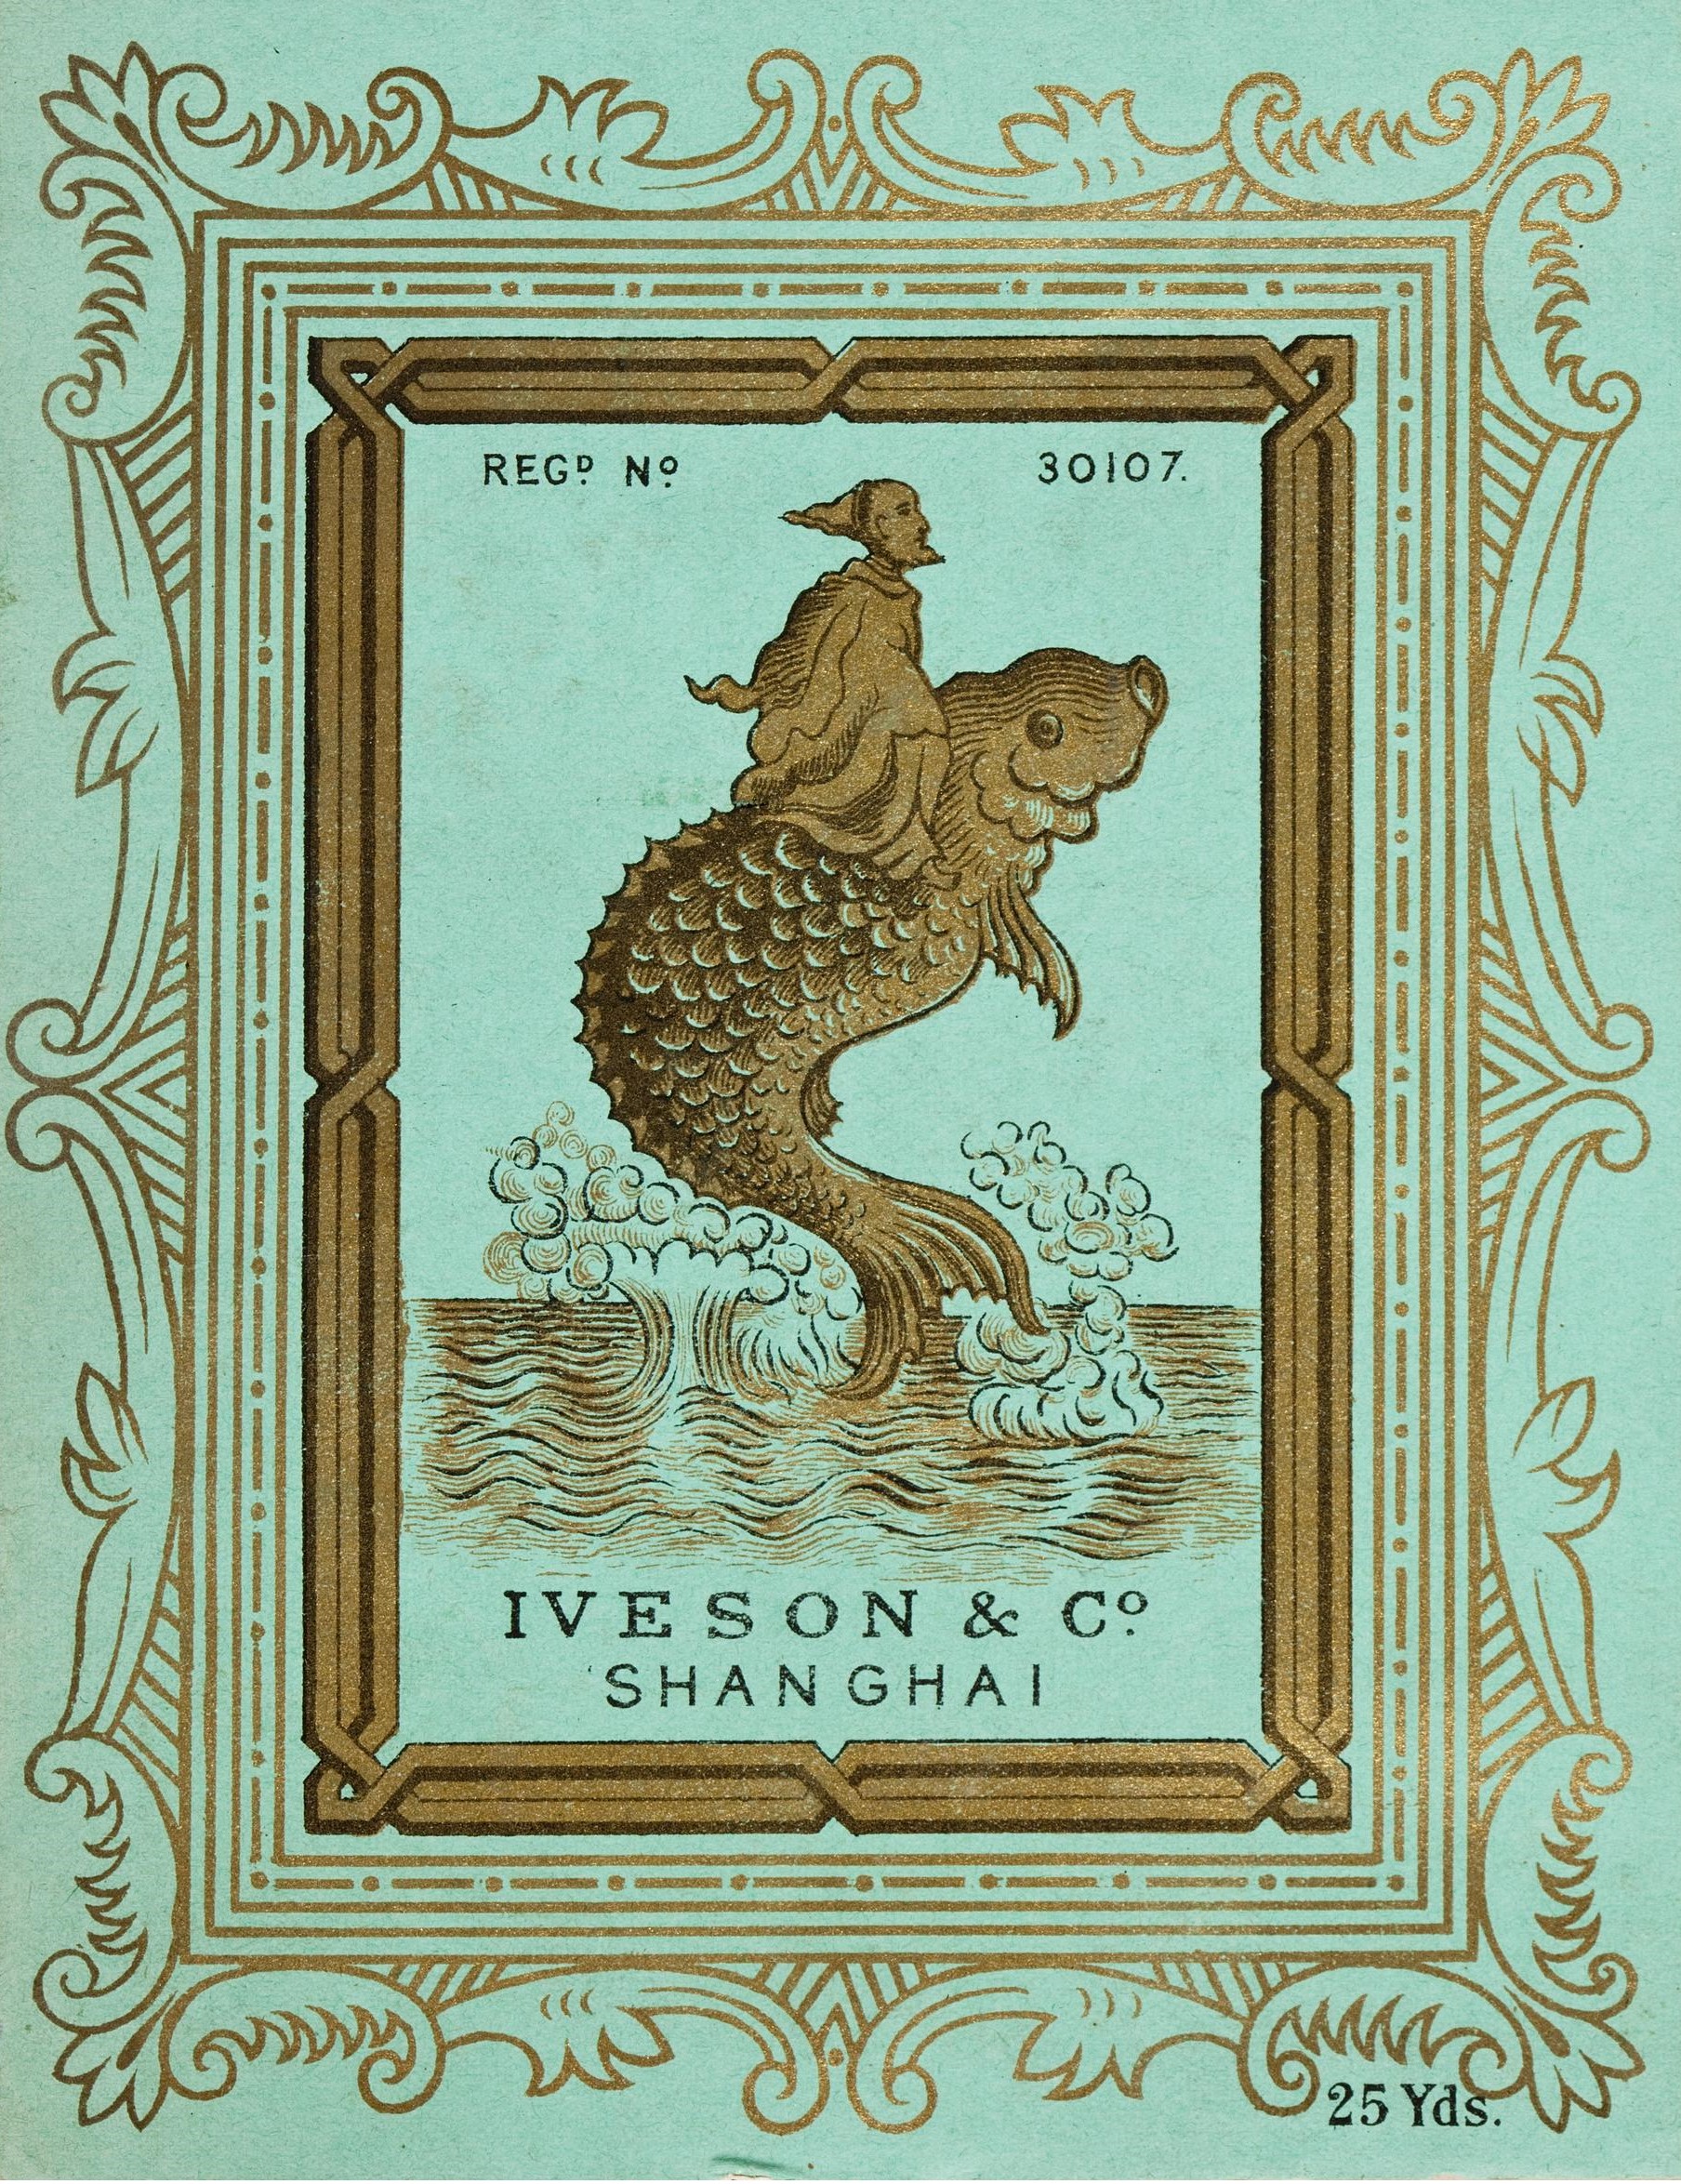 A shipper's ticket from the collection at the Museum of Science and Industry showing a man riding a leaping fish